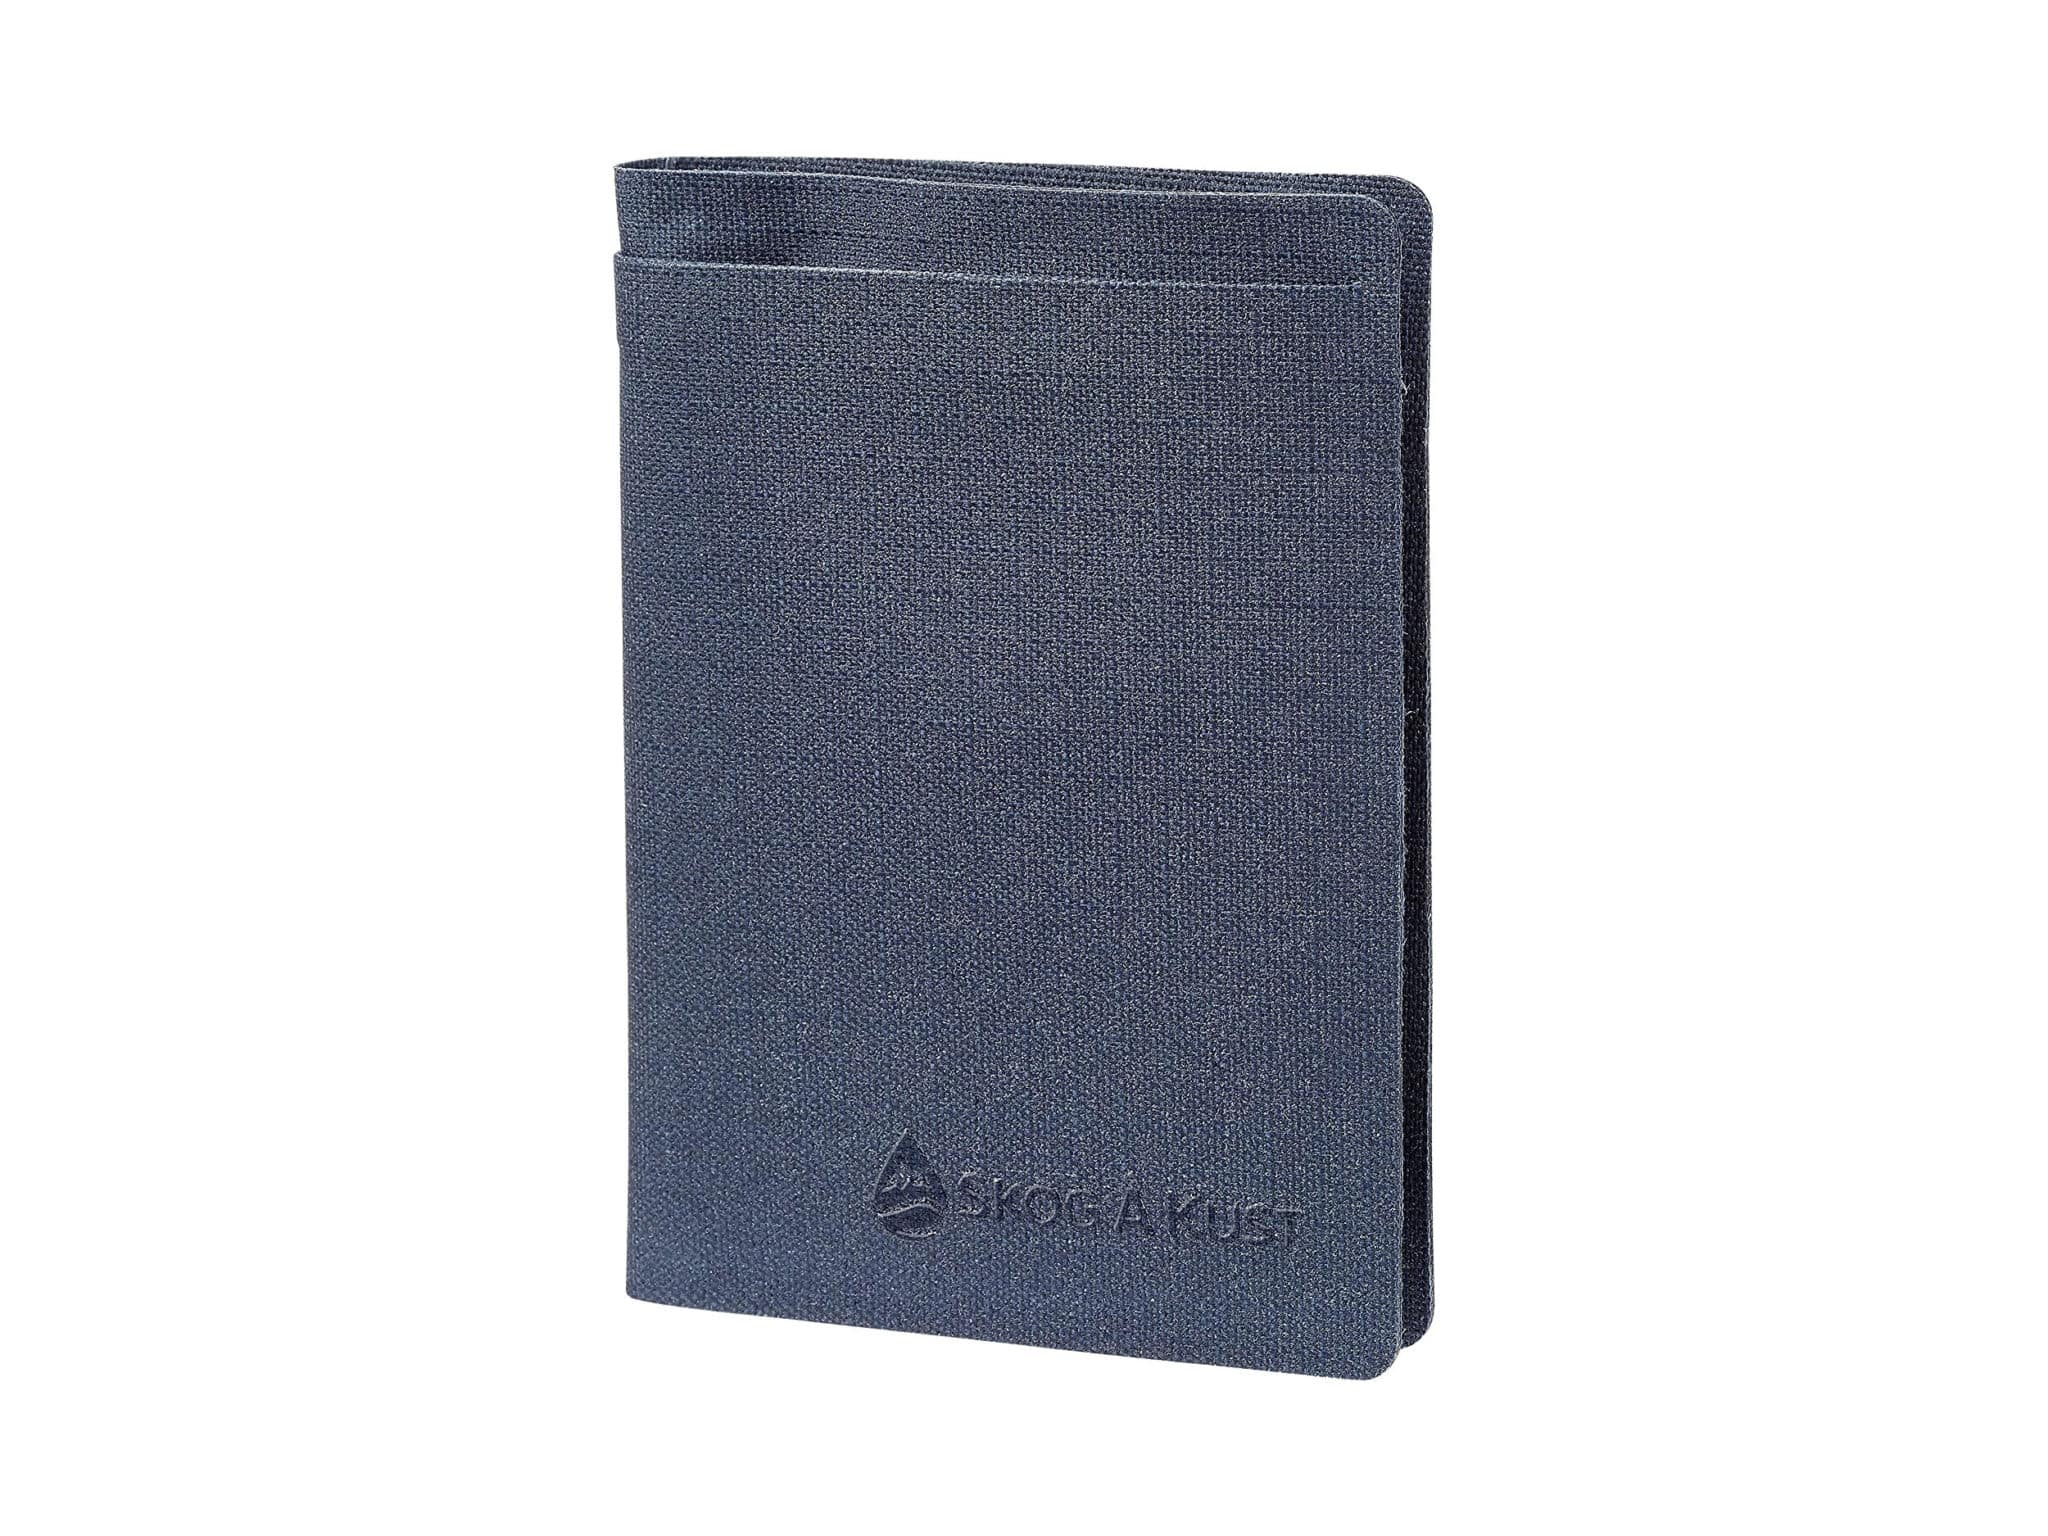 Skog Å Kust Plånbok Floating Waterproof Wallet | Perfect for Boating, Kayaking and Other Outdoor Activities | Bifold Midnight Blue